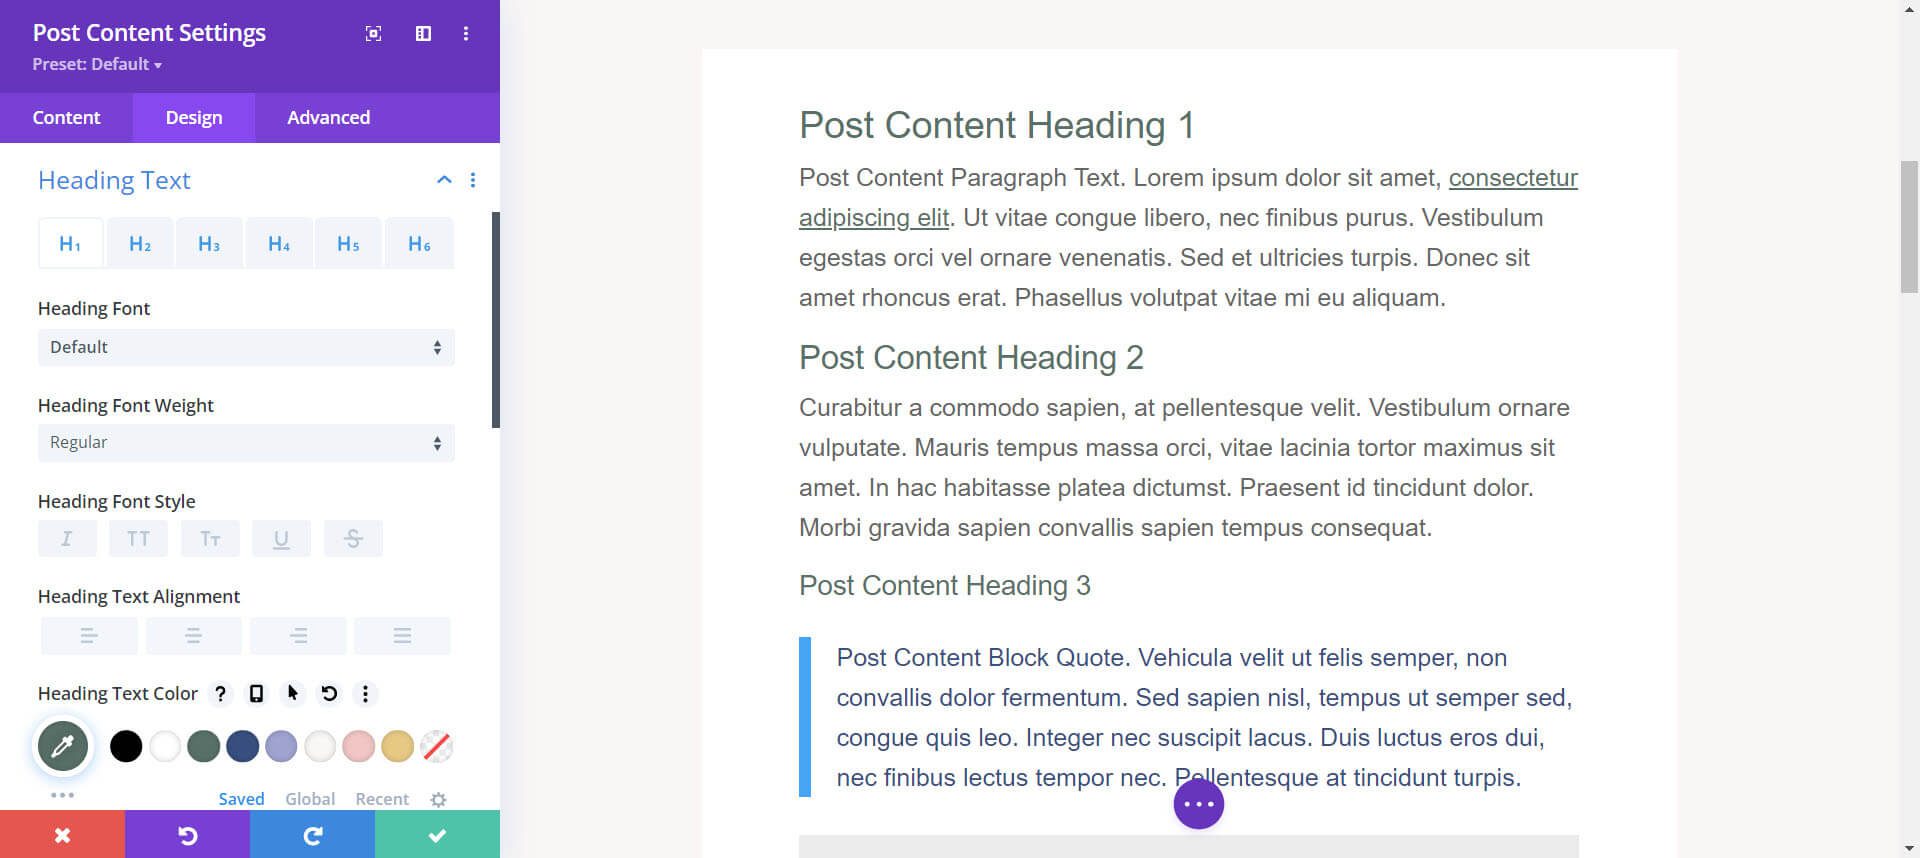 Edit the Post Content Module to match your blog and overall website theme